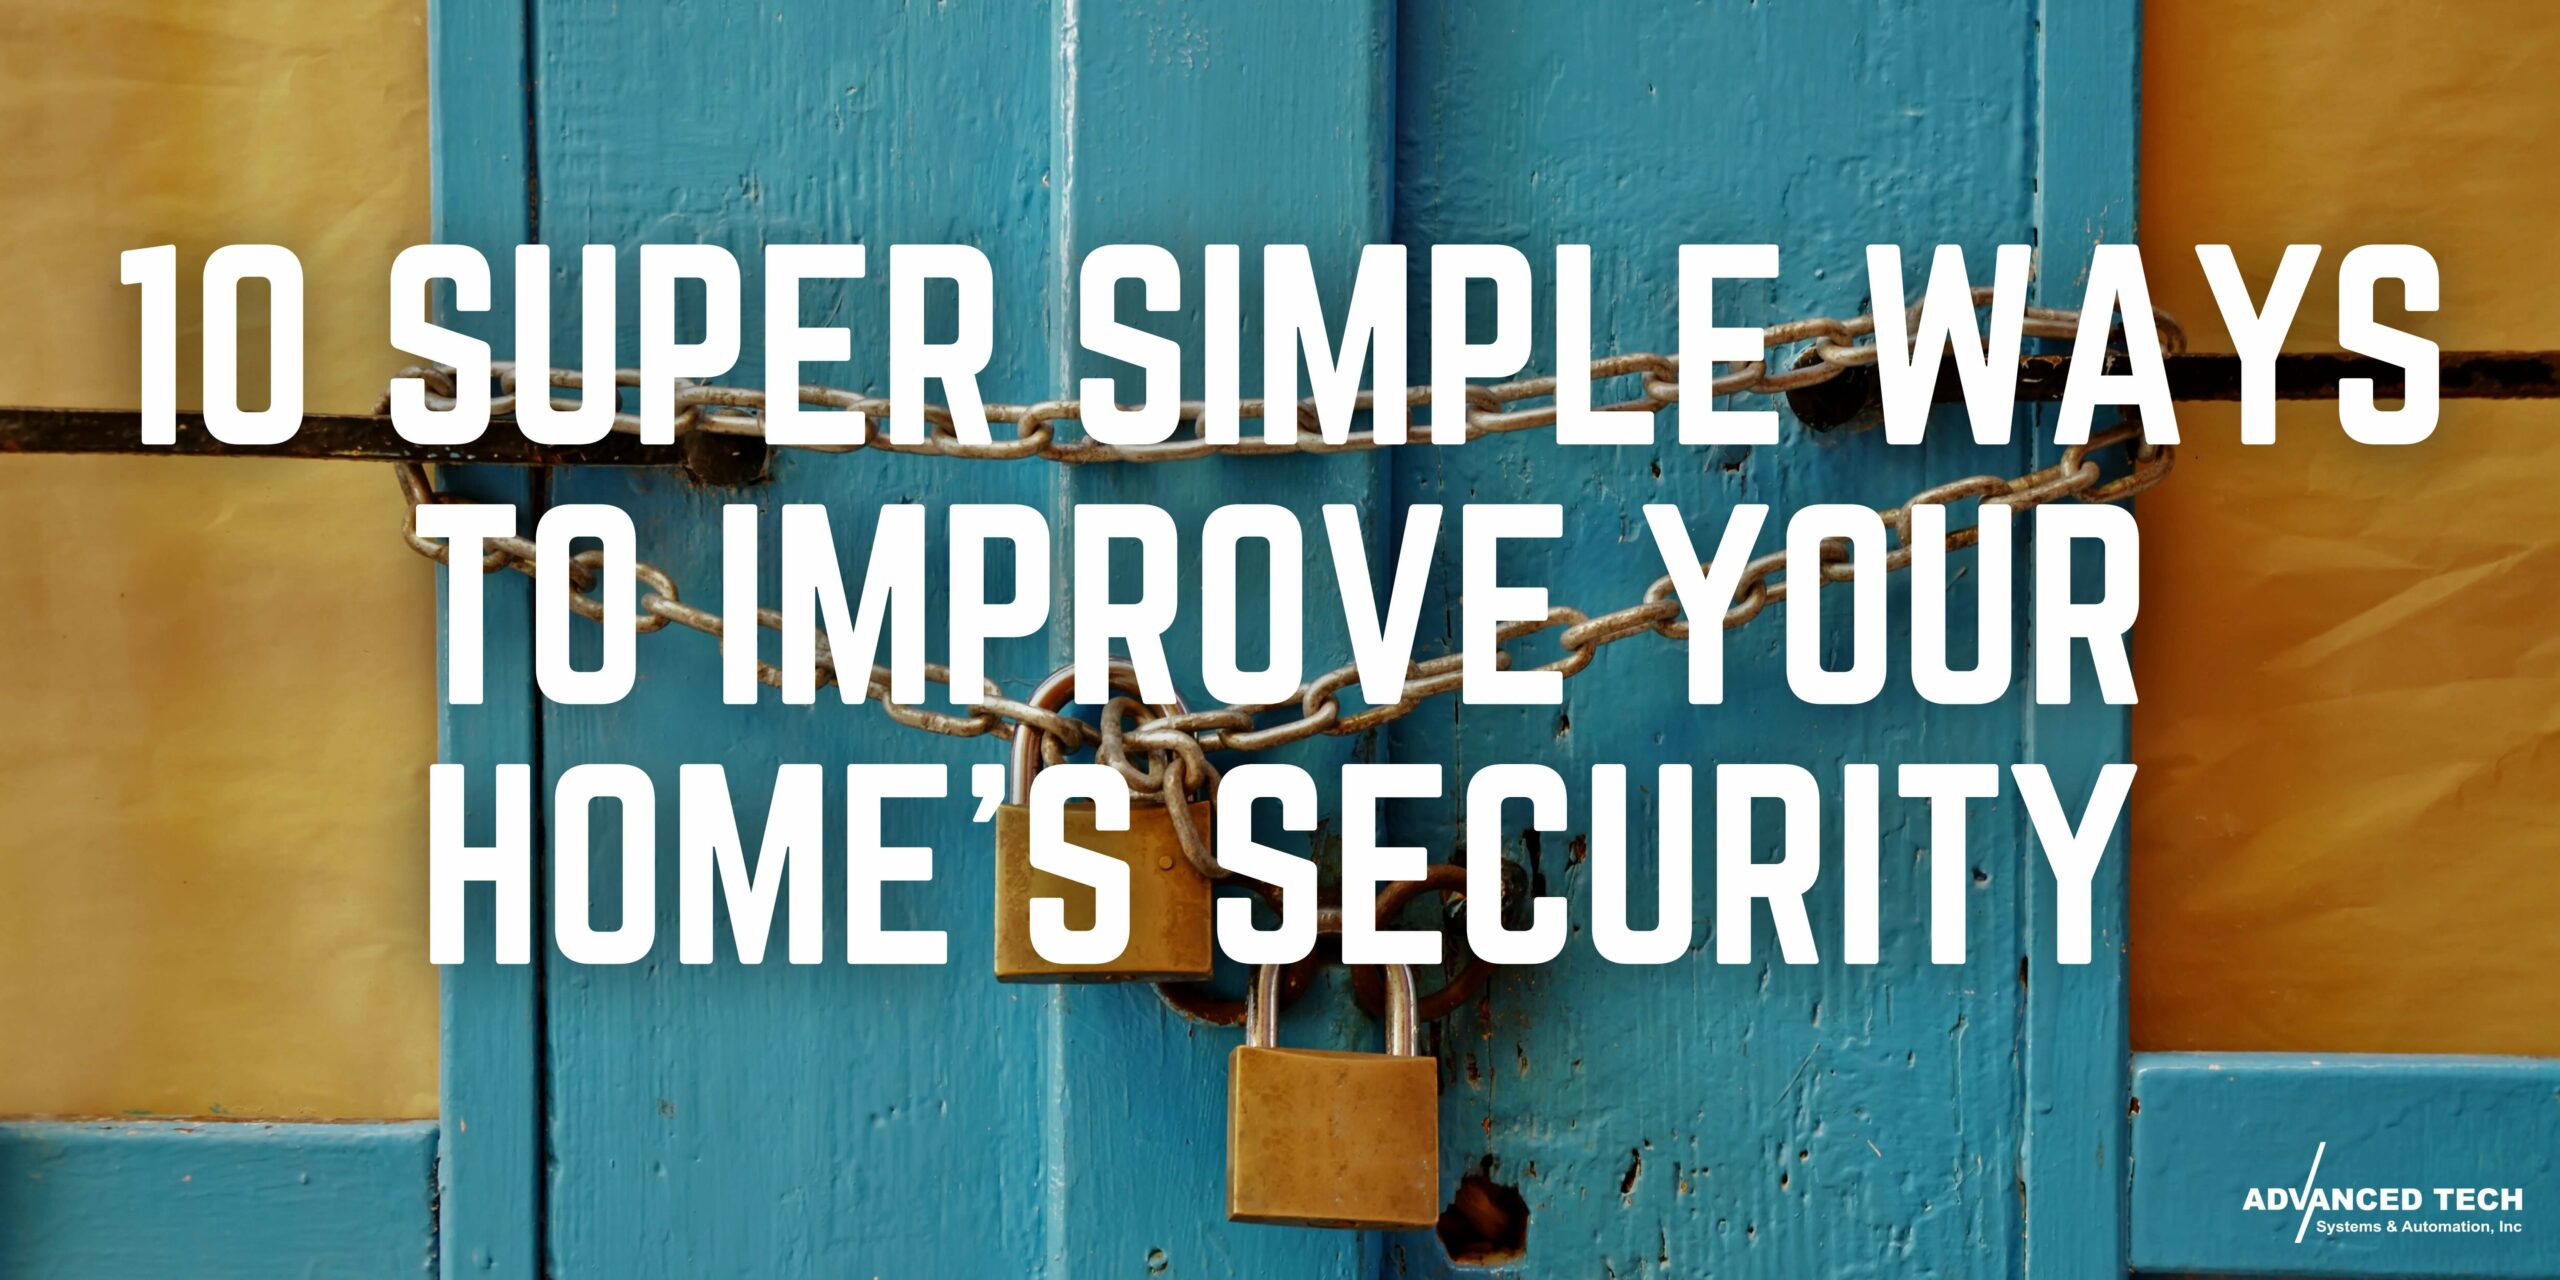 10 Super Simple Ways To Improve Your Home’s Security